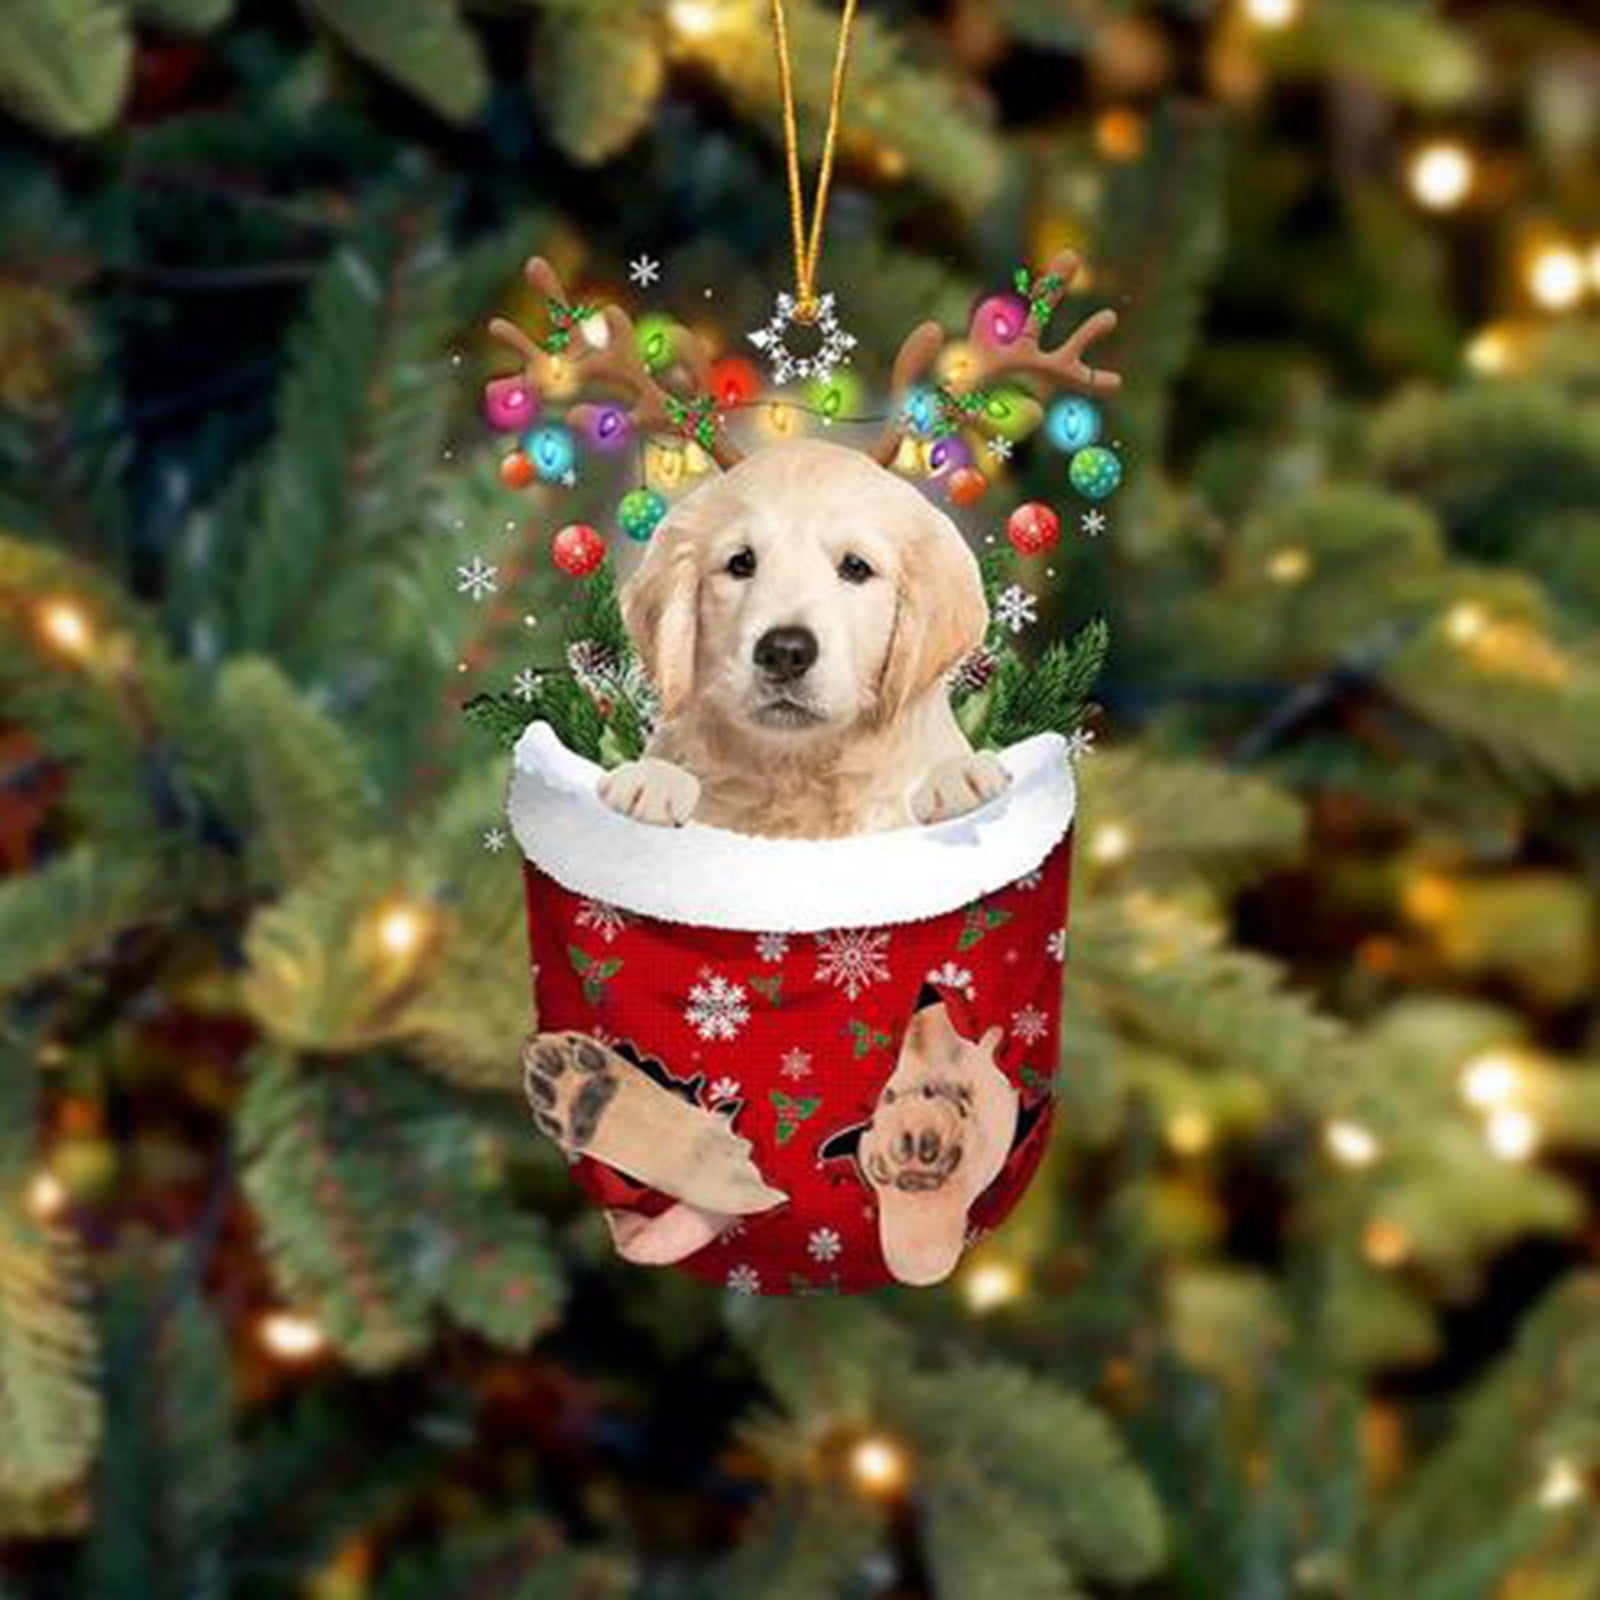 TUTUnaumb 2022 Winter Funny Christmas Tree Decorations, Suitable For Dogs - Gifts For Dog Lovers -Christmas Decorations -Lovely Stockings Dog Christmas Tree -D Walmart.com